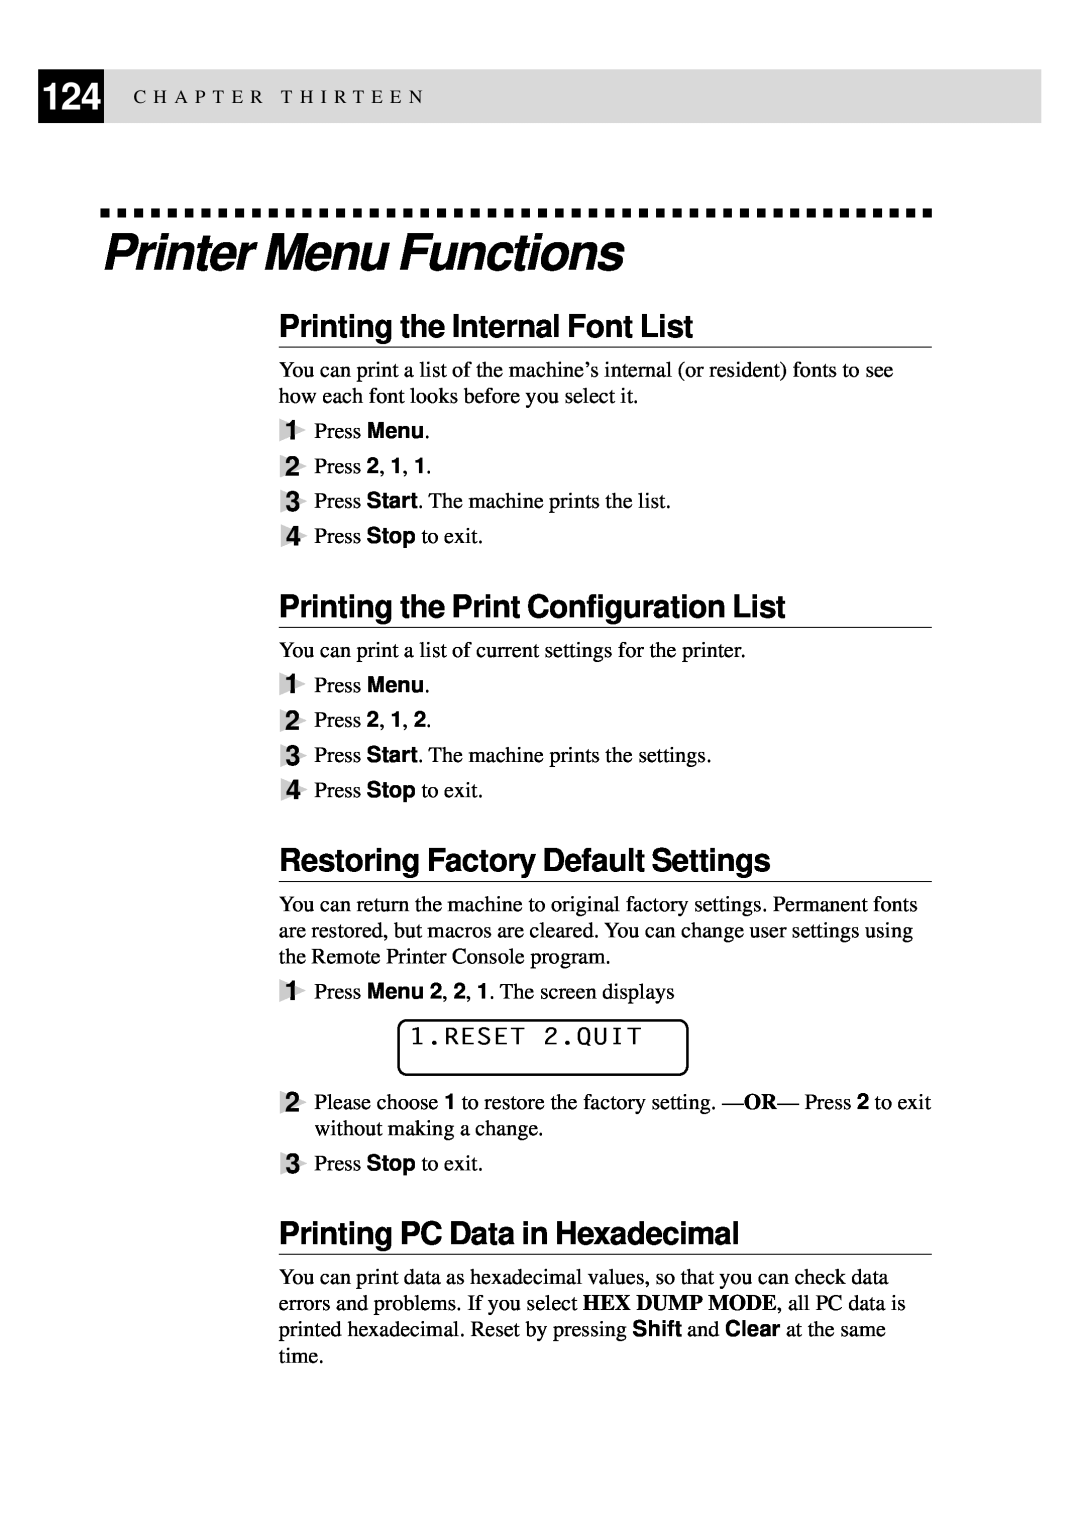 Brother FAX-8350P, MFC-9650 Printer Menu Functions, Printing the Internal Font List, Printing the Print Configuration List 